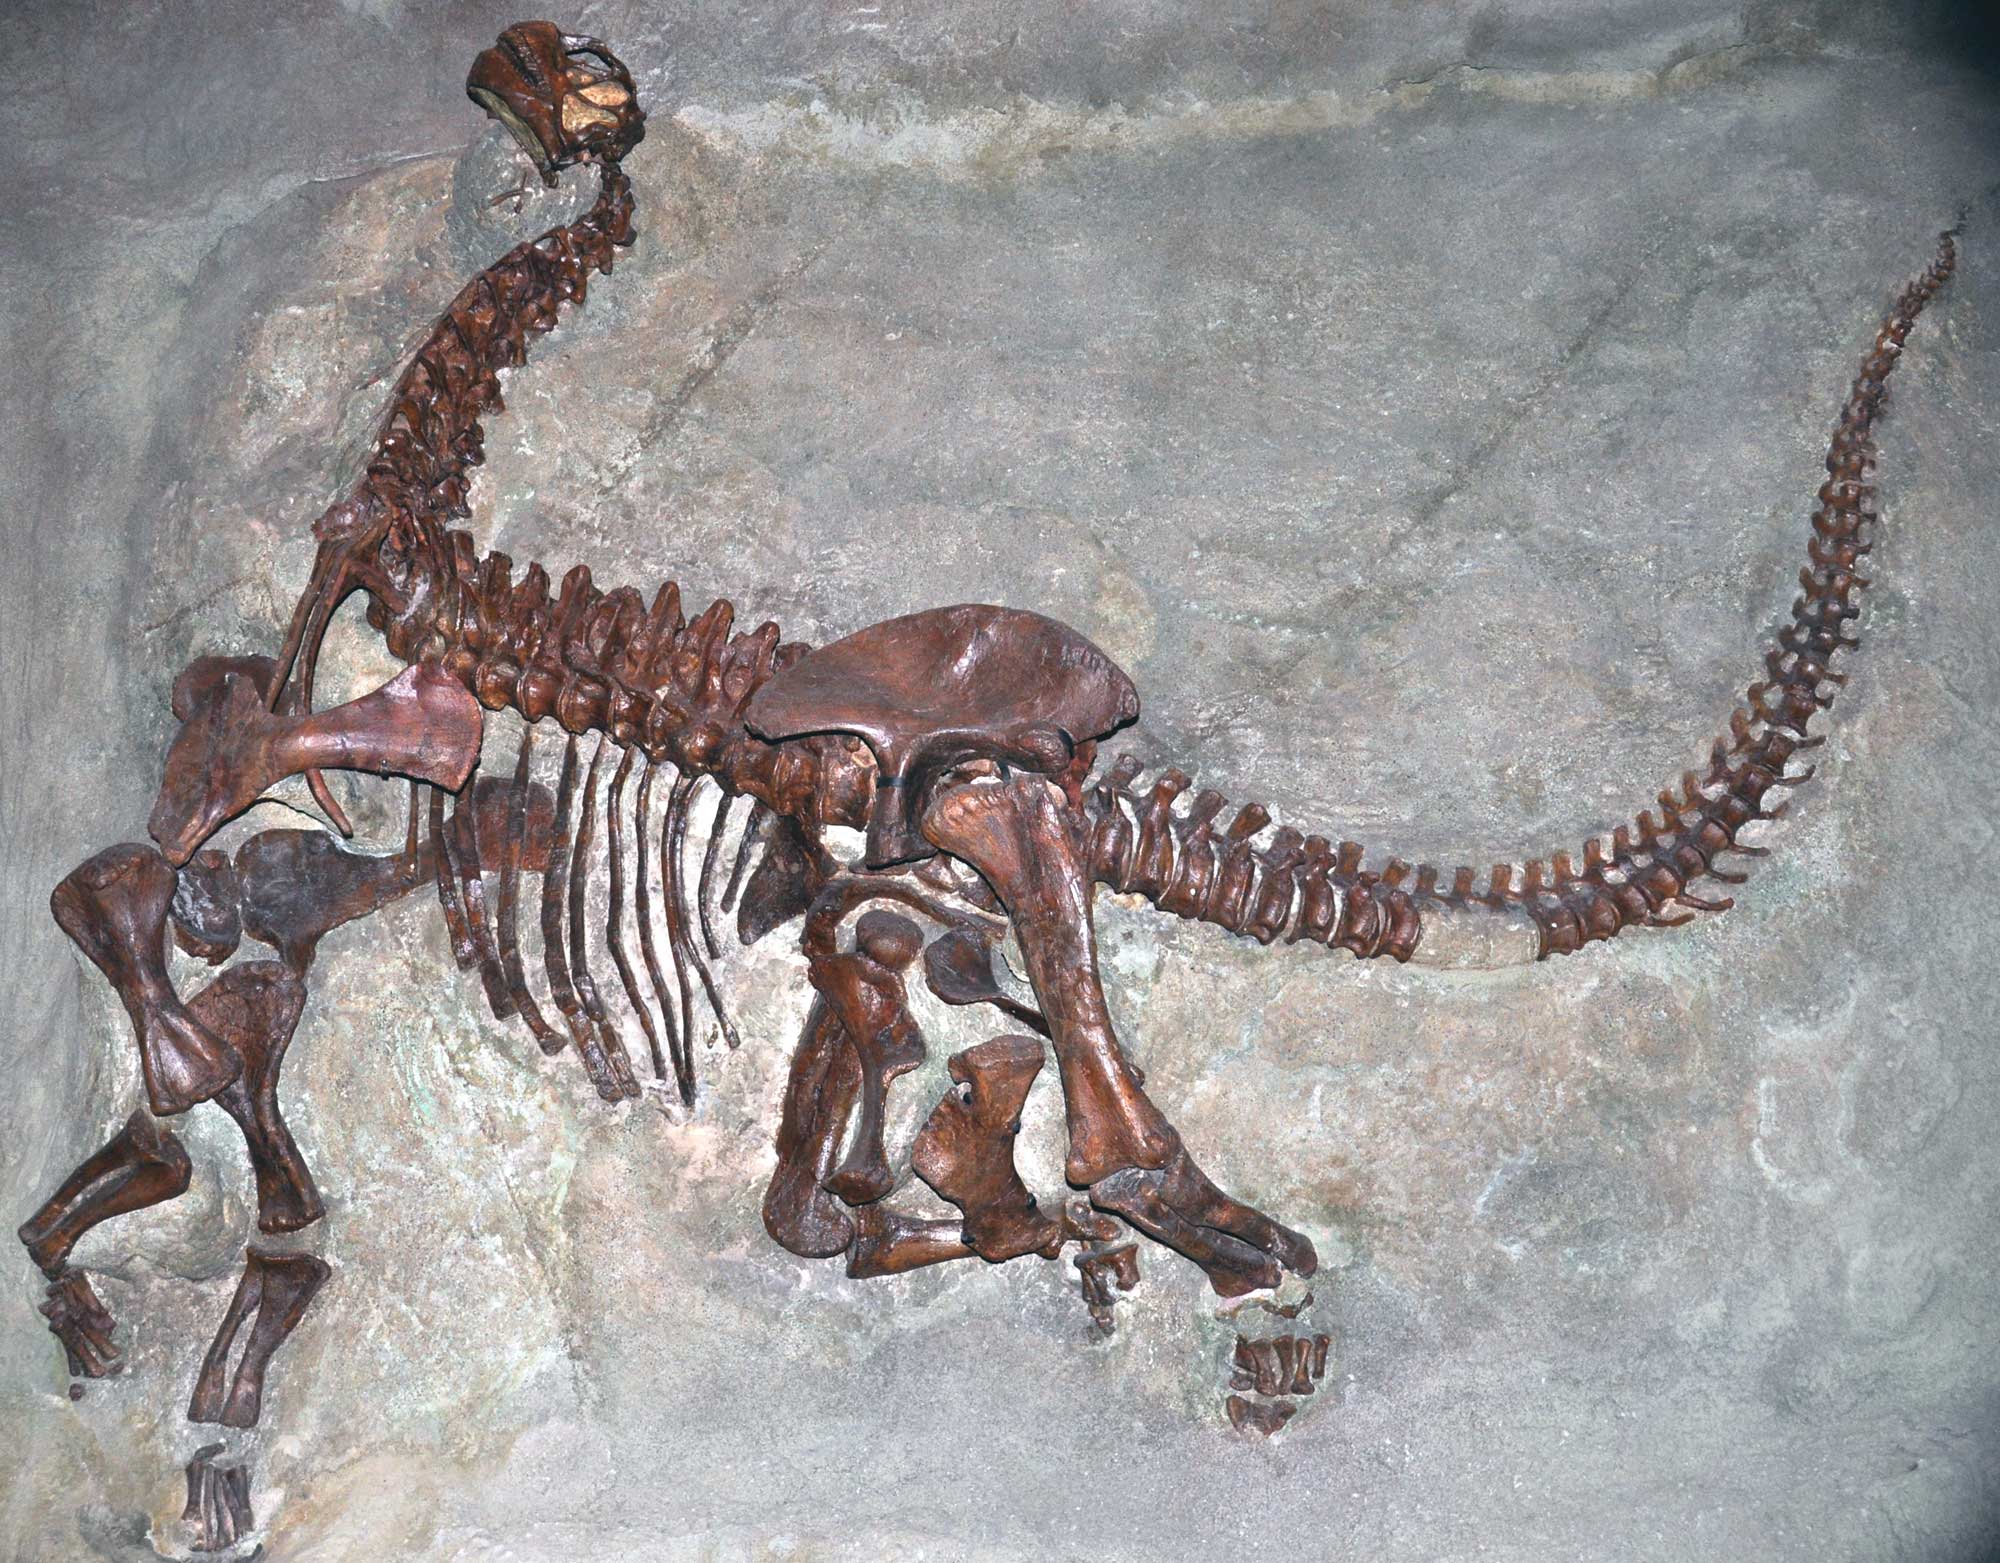 Photograph of a juvenile sauropod skeleton in a death pose partially embedded in rock. The sauropod has a long neck, a small head and is quadrapedal (walks on all fours). The tail is arched upward.